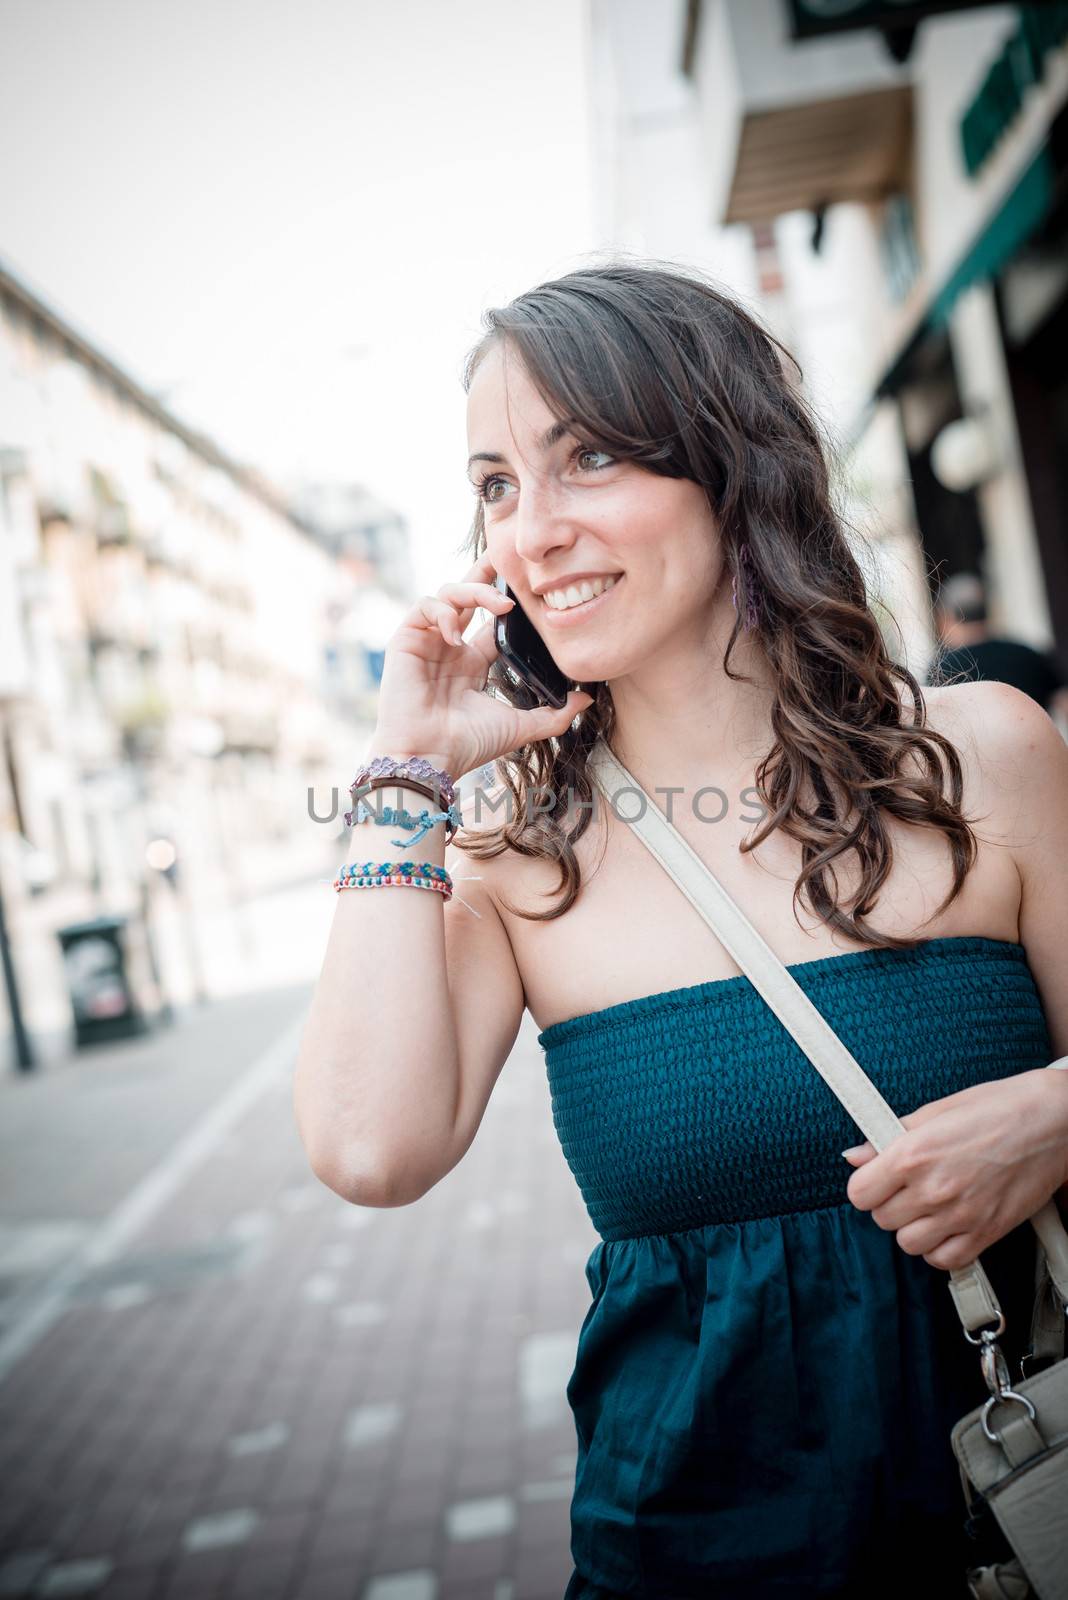 beautiful woman on the phone walking in the city